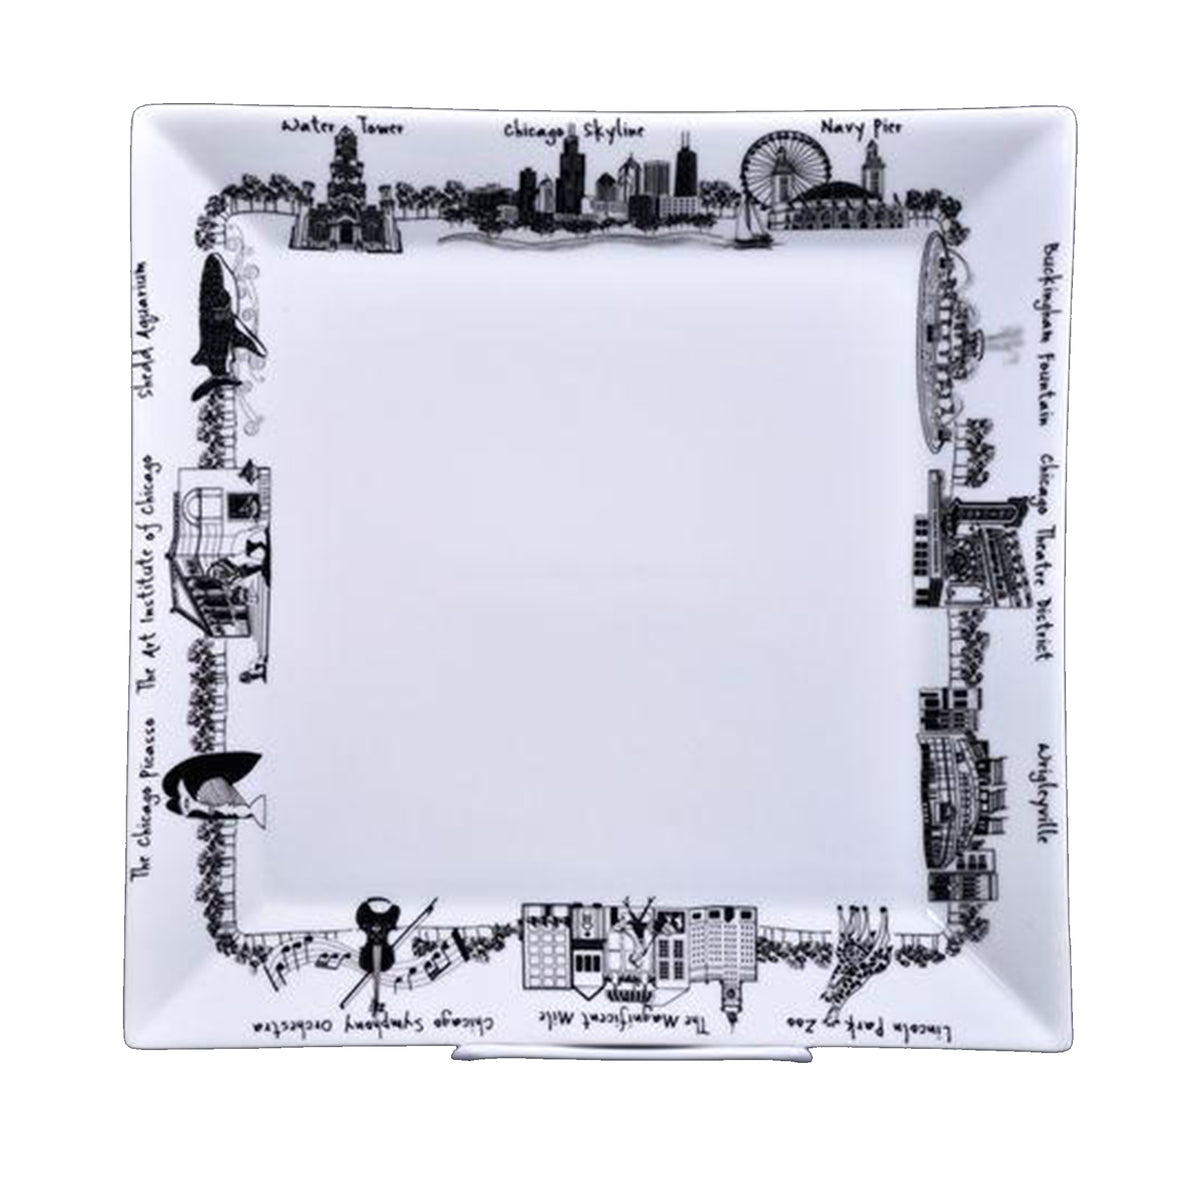 Large Square Chicago Plate - All She Wrote